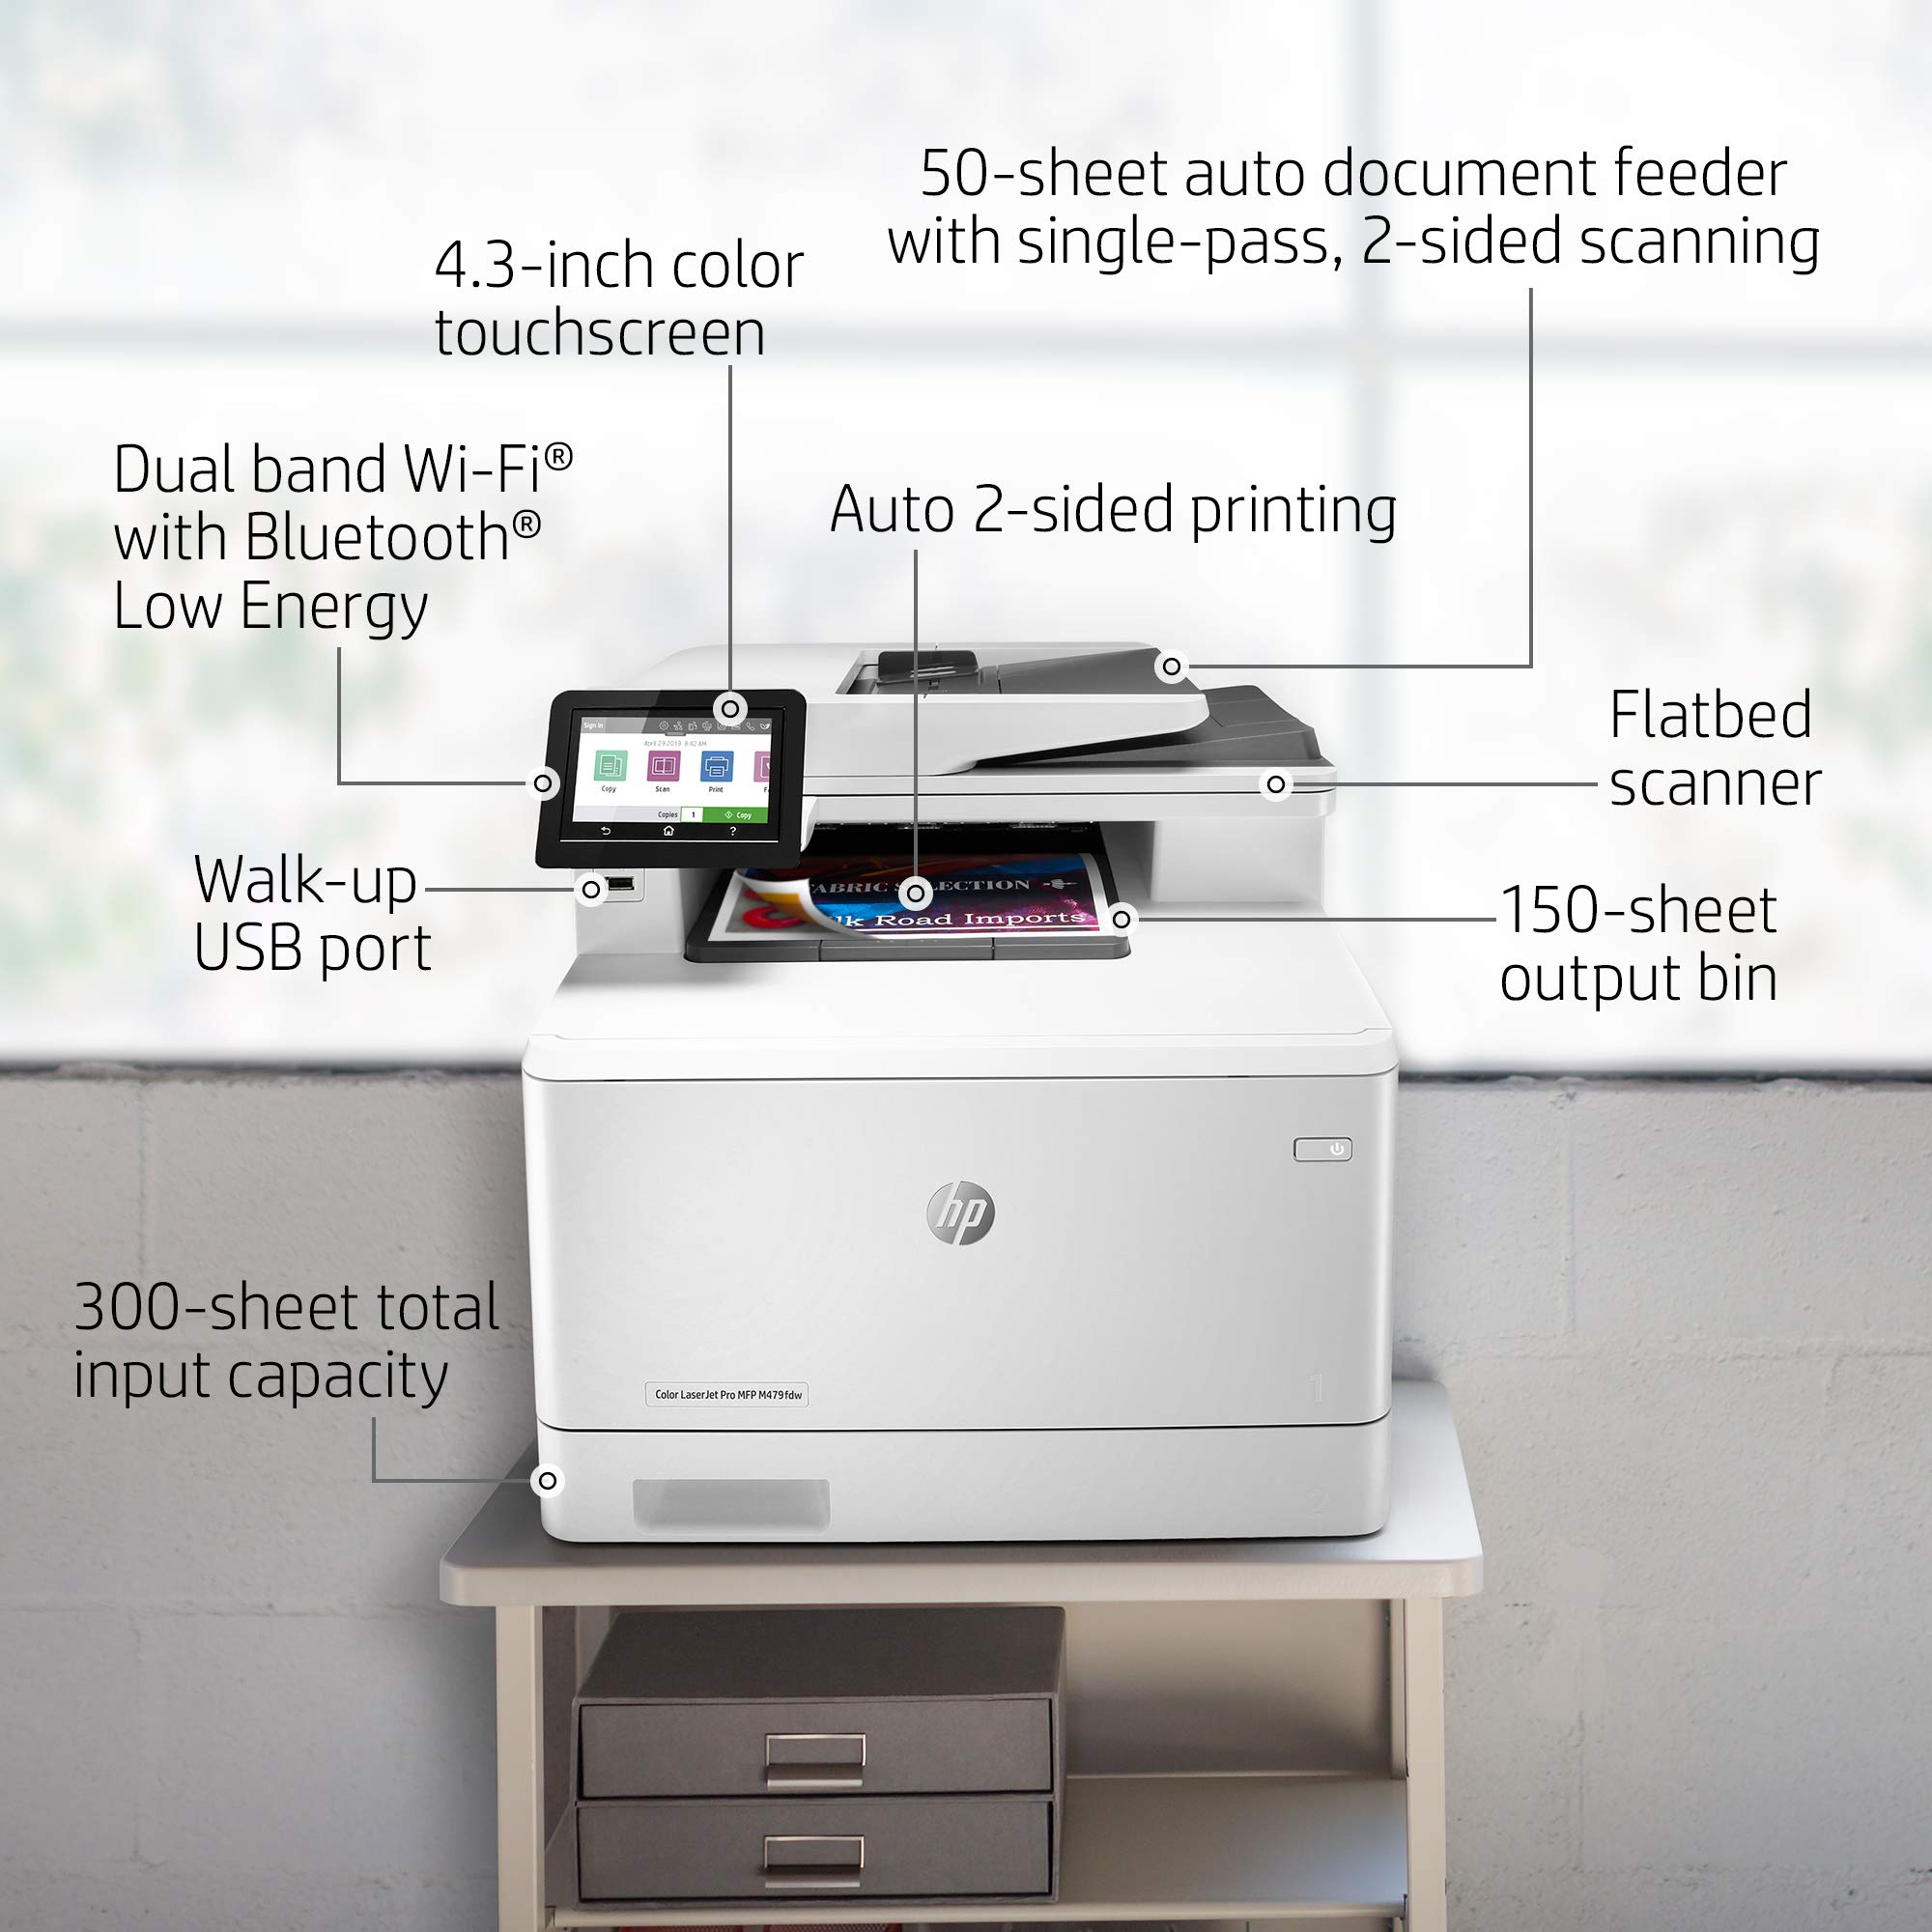 HP Color LaserJet Pro Multifunction M479fdw Wireless Laser Printer with One-Year, Next-Business Day, Onsite Warranty (W1A80A), White